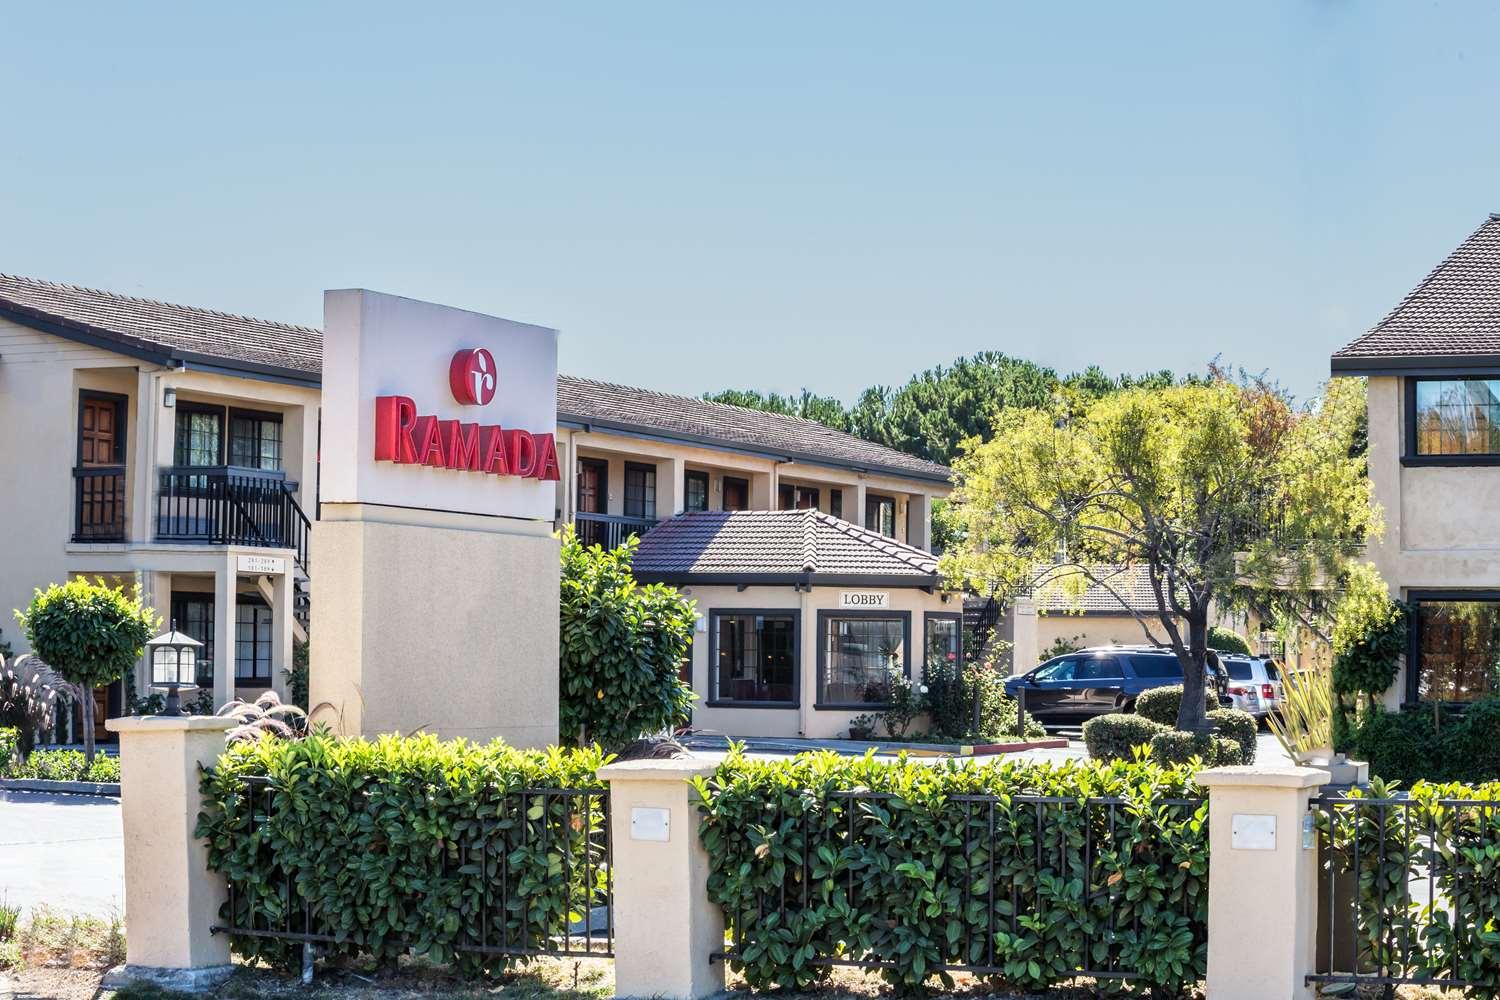 Ramada by Wyndham Mountain View in Mountain View, CA